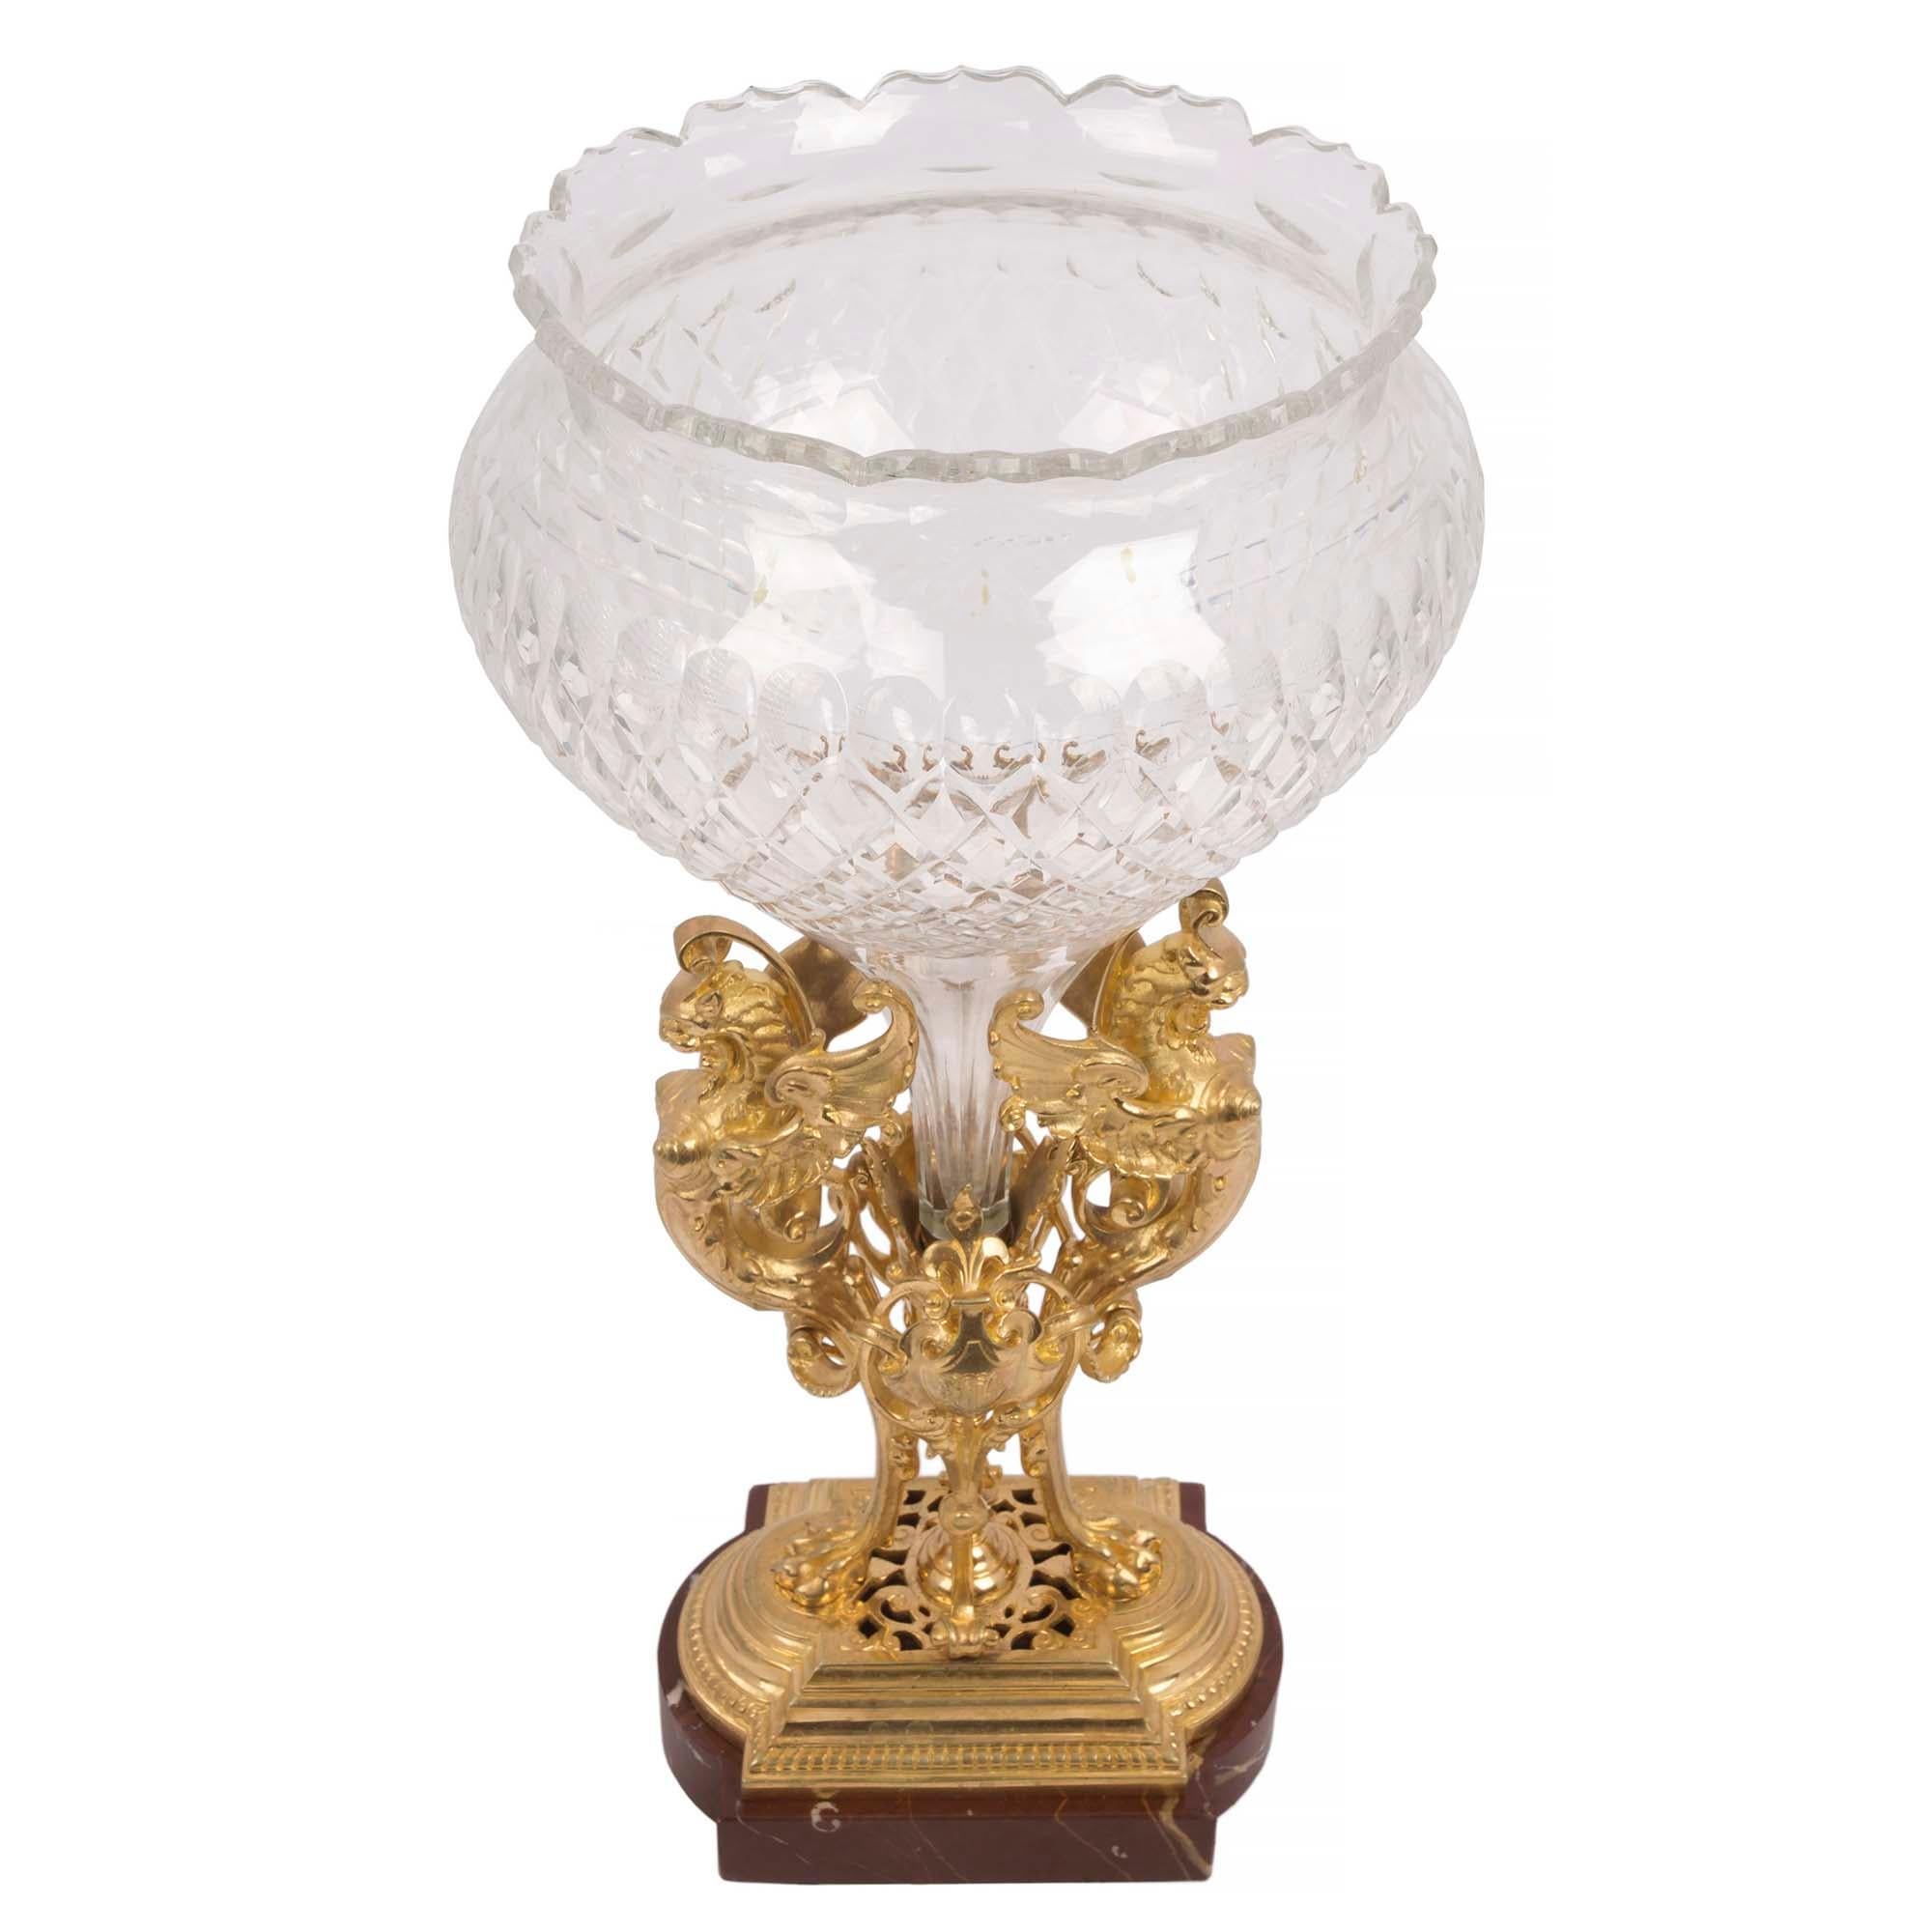 An outstanding French 19th century Renaissance st. Rouge Royale marble and Baccarat crystal centerpiece vase. The vase is raised by a rectangular Rouge Royale base with convex sides, a stepped ormolu design and fine pierced scrolled movements. The